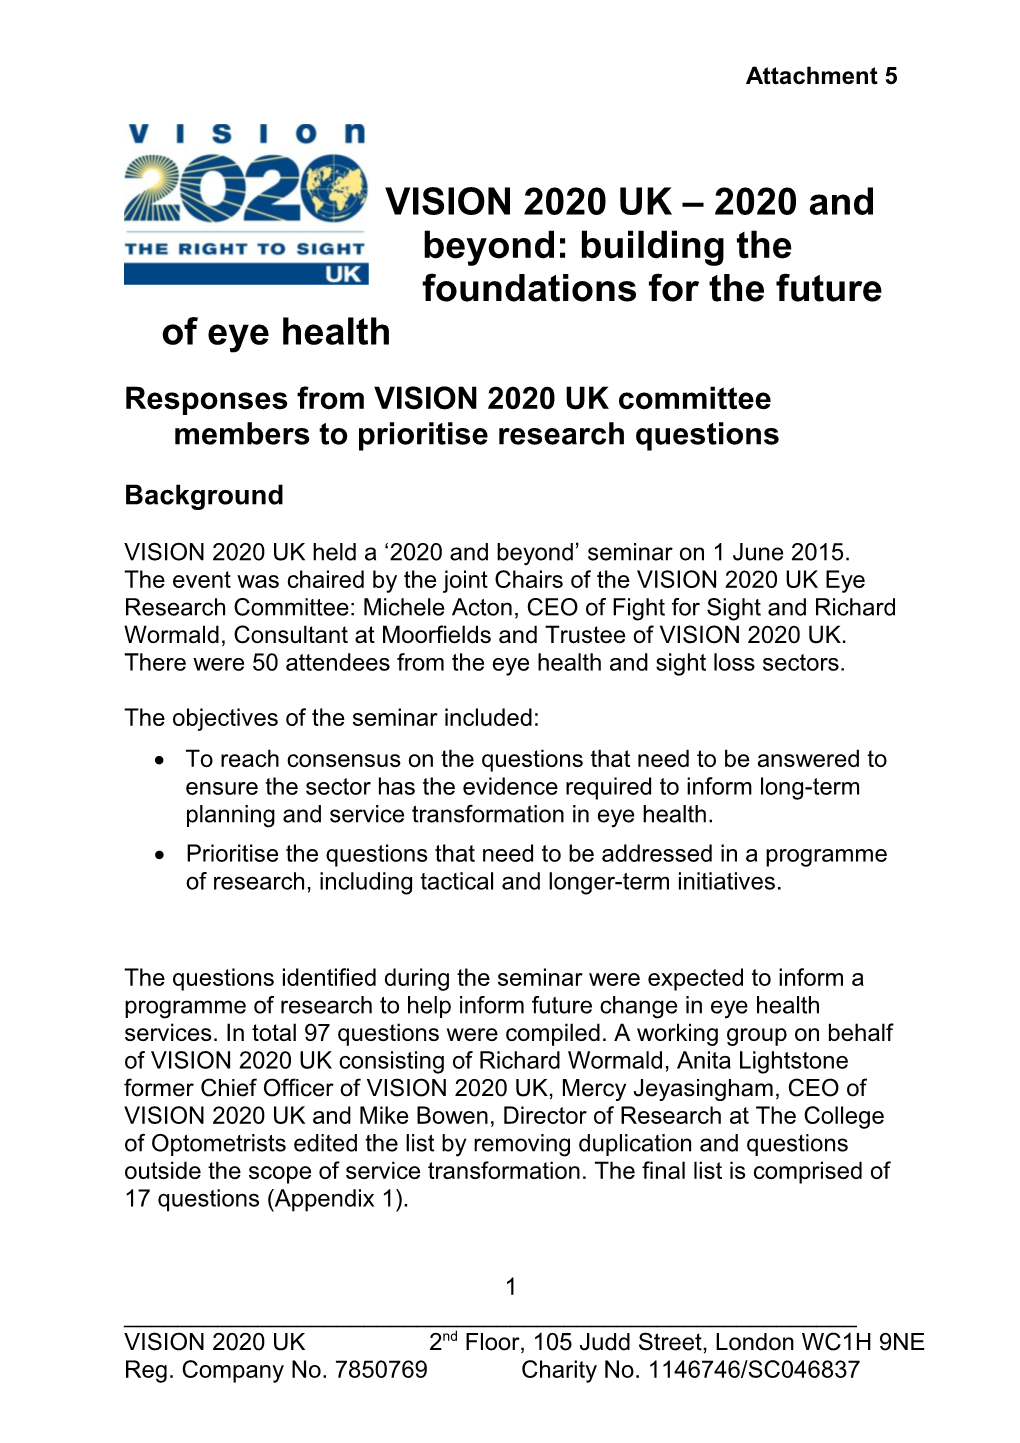 VISION 2020 UK 2020 and Beyond: Building the Foundations for the Future of Eye Health